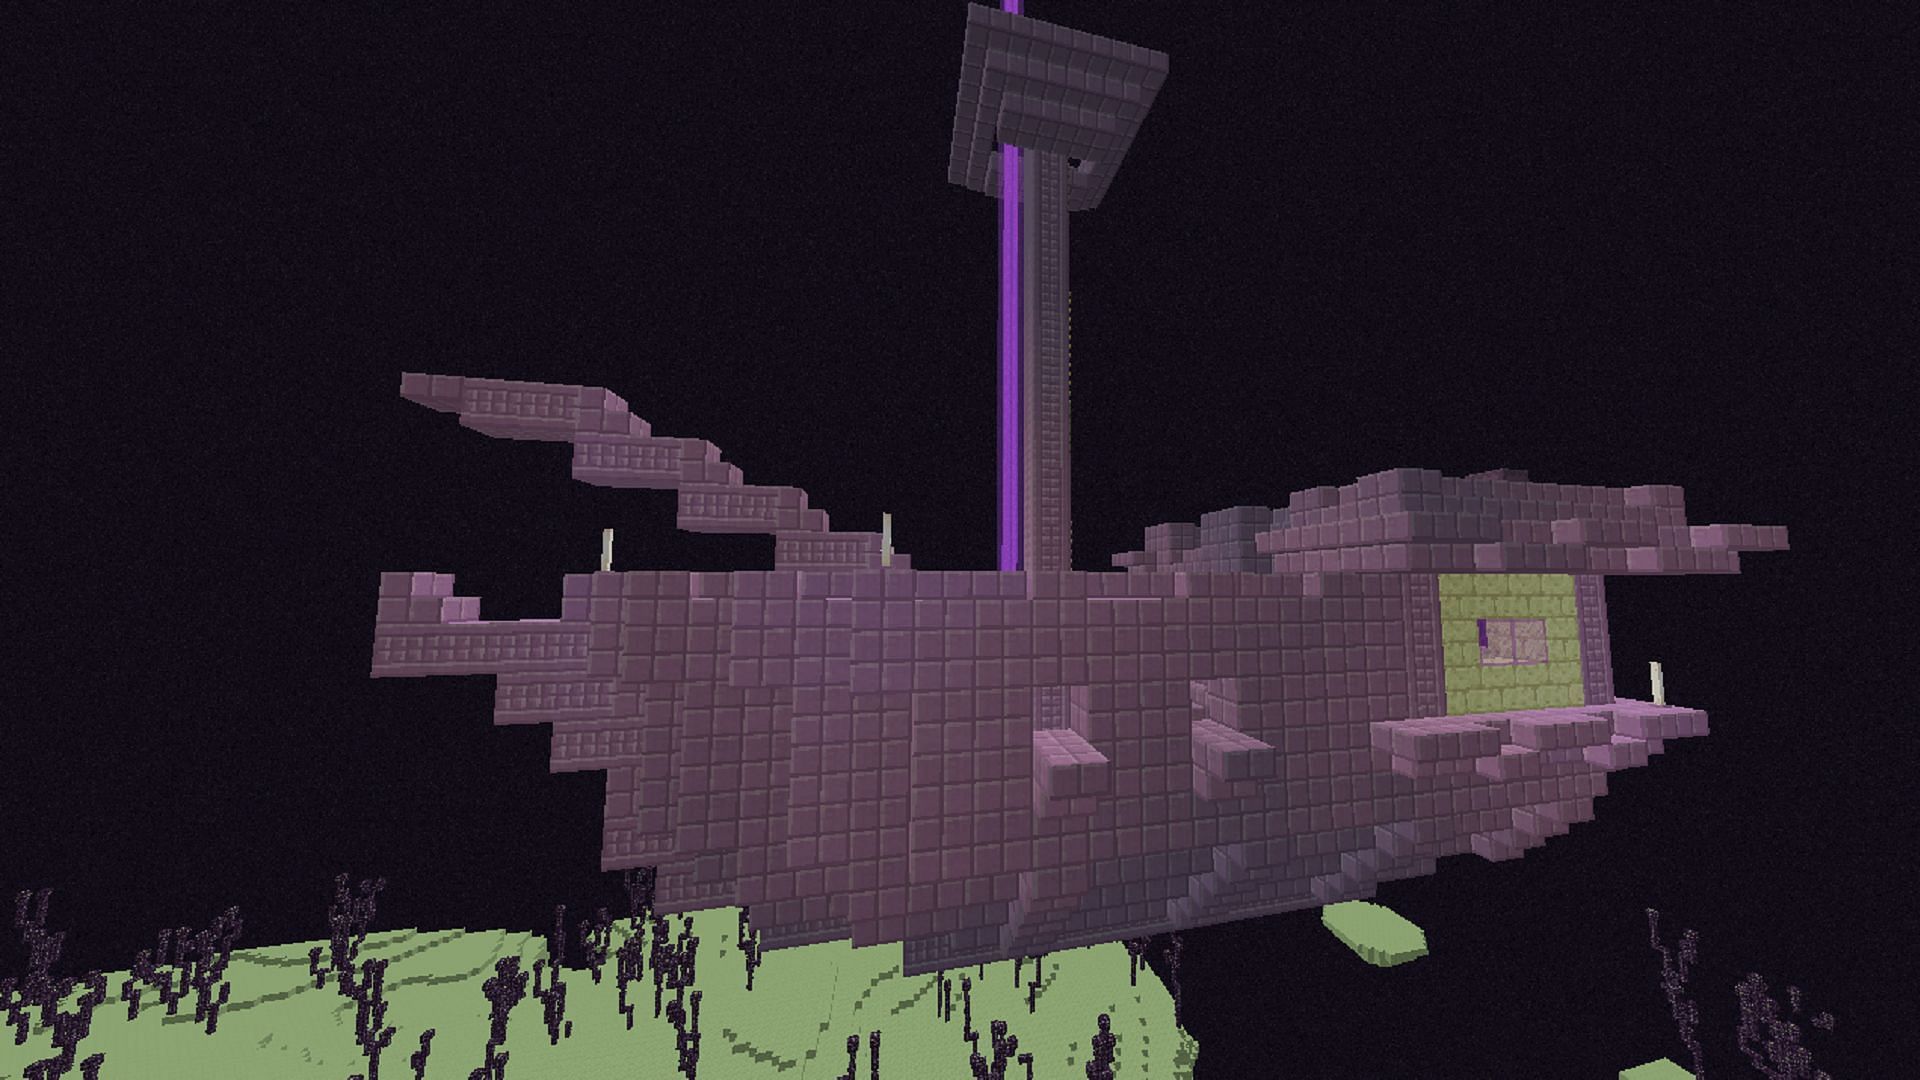 End ships are an additional structure found near End ships in Minecraft (Image via Mojang)